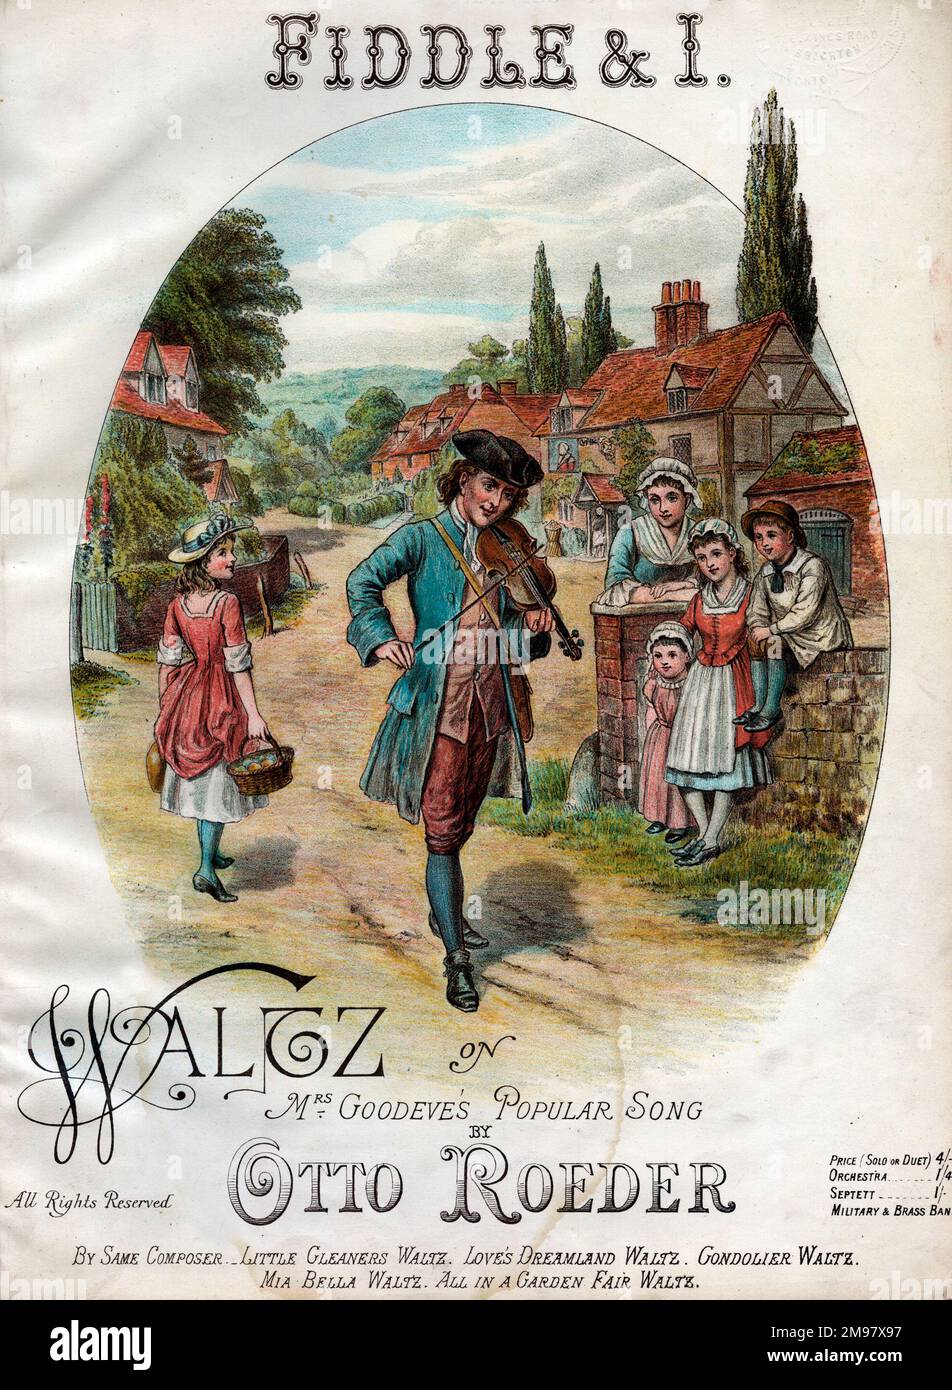 Music cover, Fiddle & I, a waltz based on Mrs Goodeve's popular song, by Otto Roeder. Stock Photo